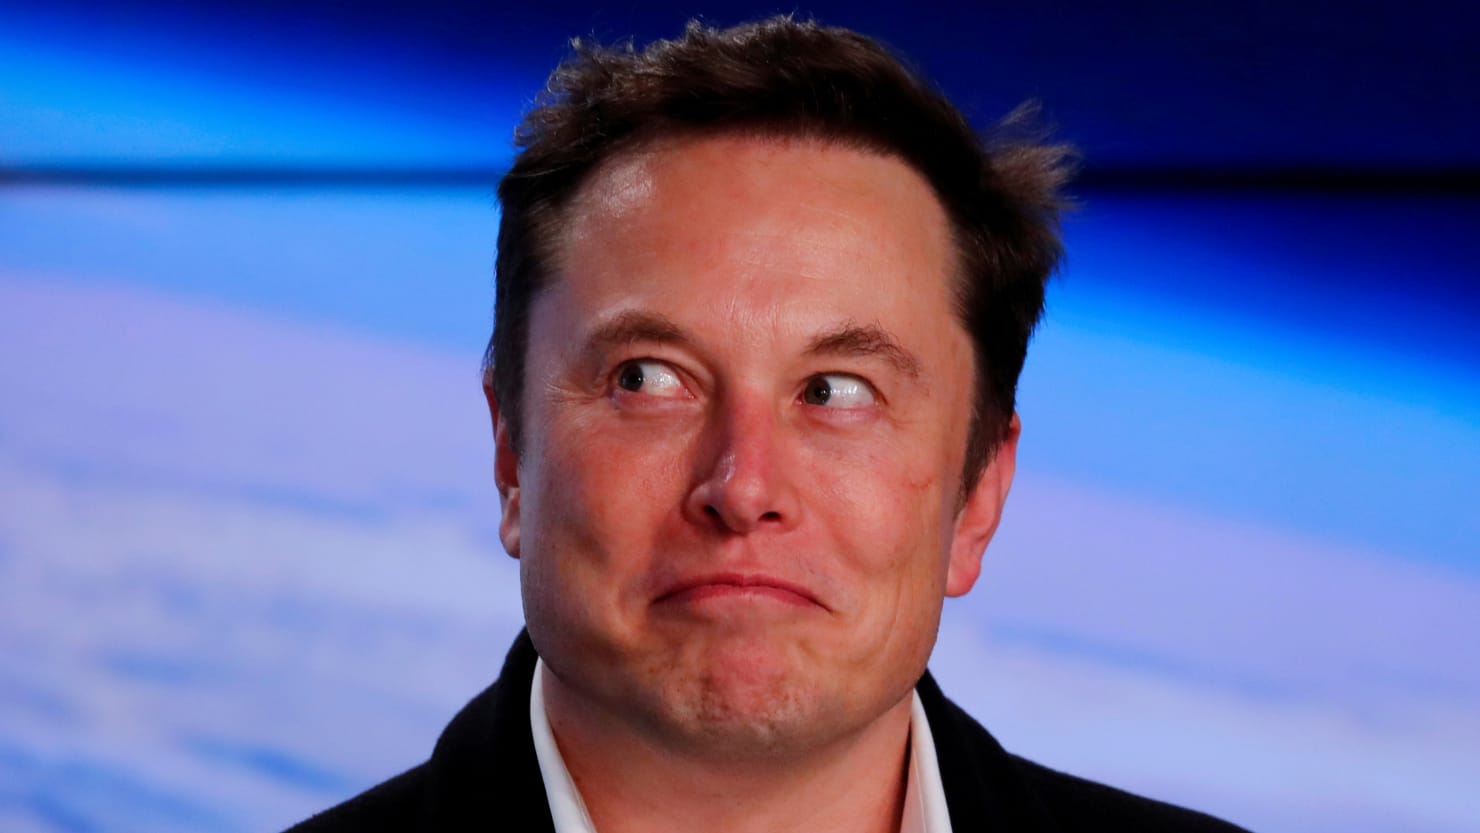 Elon Musk Chimes in on ‘Psyop’ Claim About Allen Mall Shooter